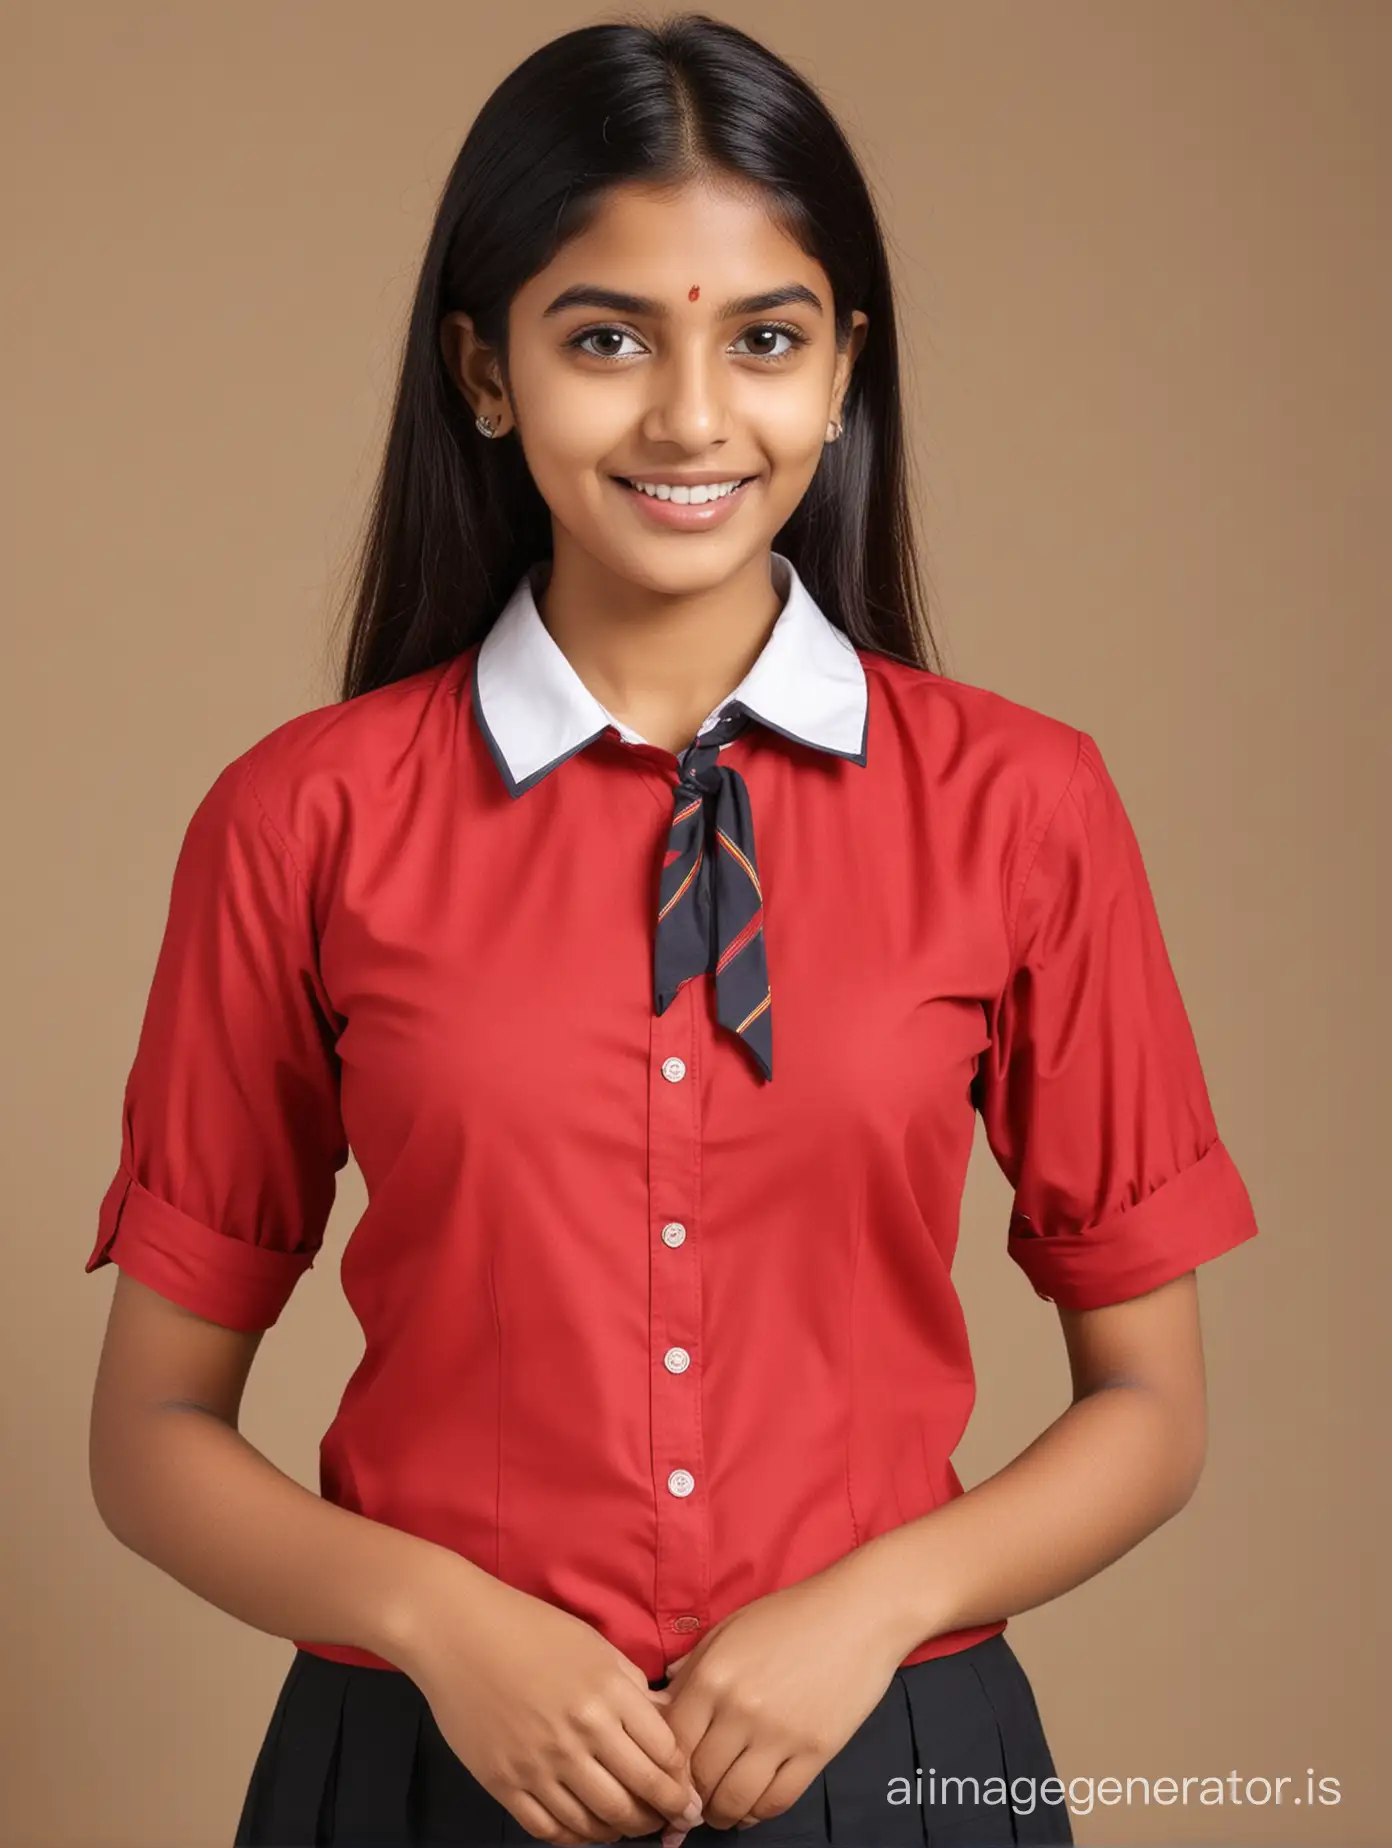 Indian-Schoolgirl-in-Vibrant-Red-Blouse-Standing-Proudly